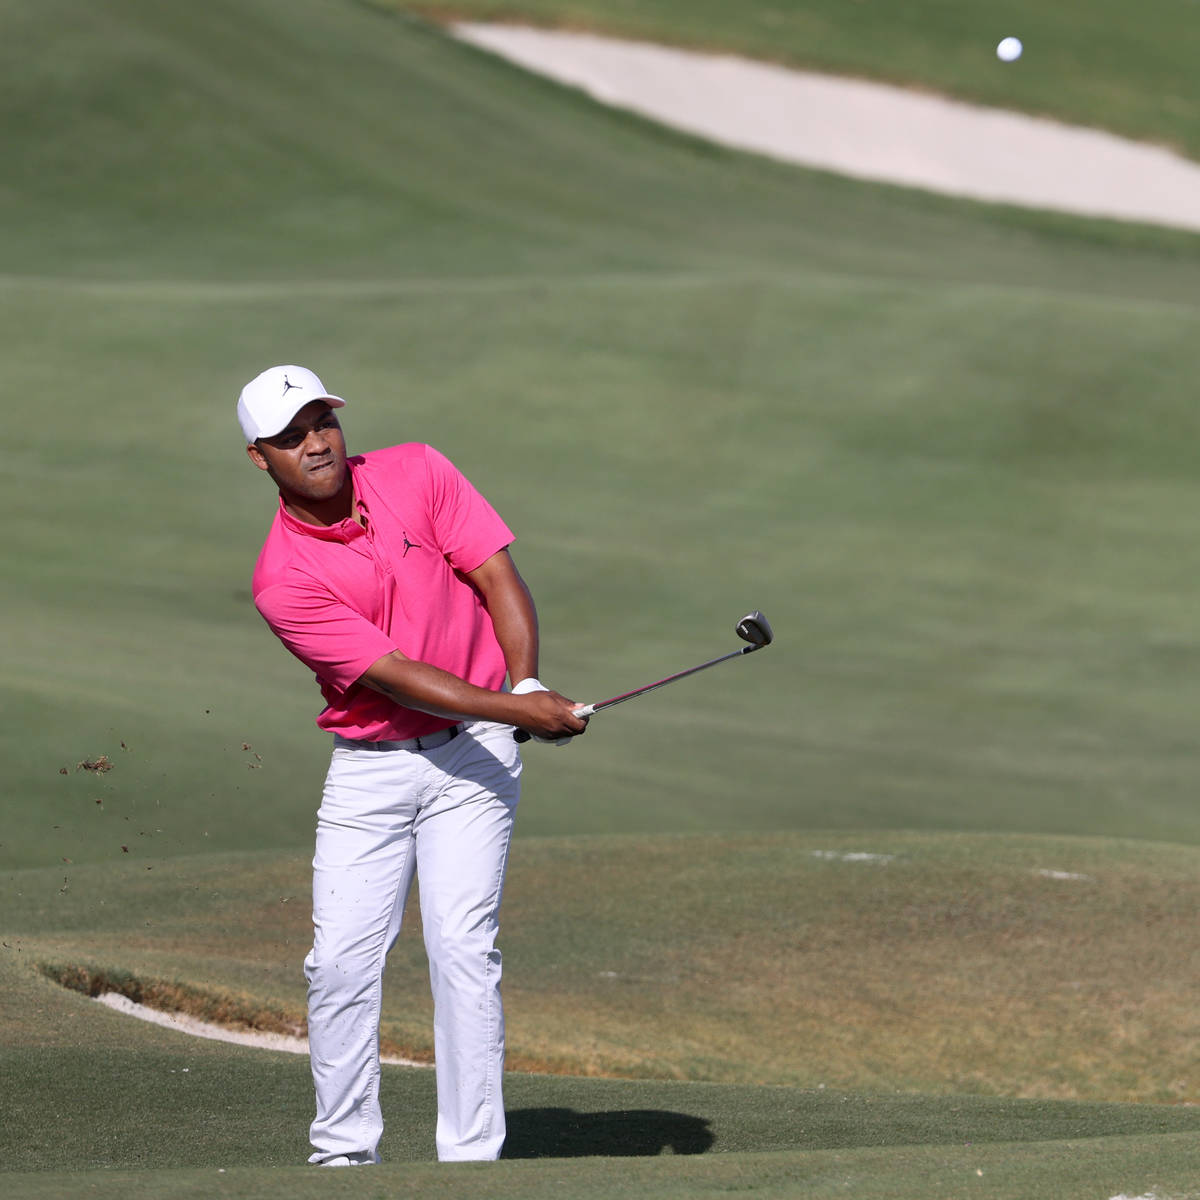 Harold Varner III hits the ball at the 15th hole during round three of the 2020 Shriners Hospit ...